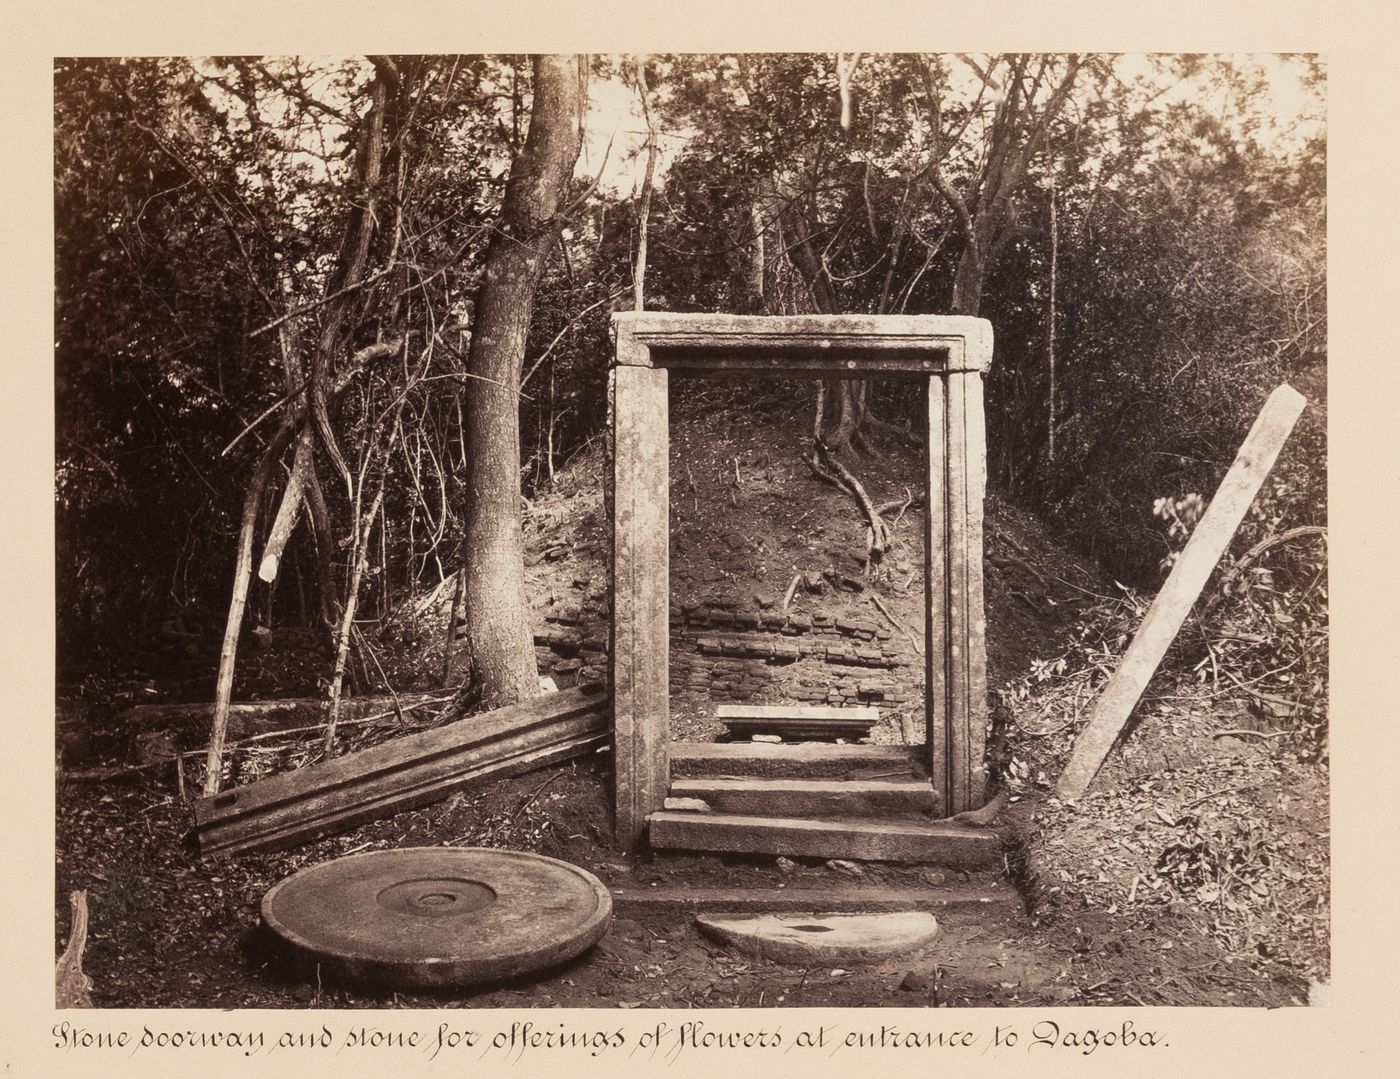 View of a doorway and dagoba with a stone used for offerings in the left foreground, Mihintale, Ceylon (now Sri Lanka)